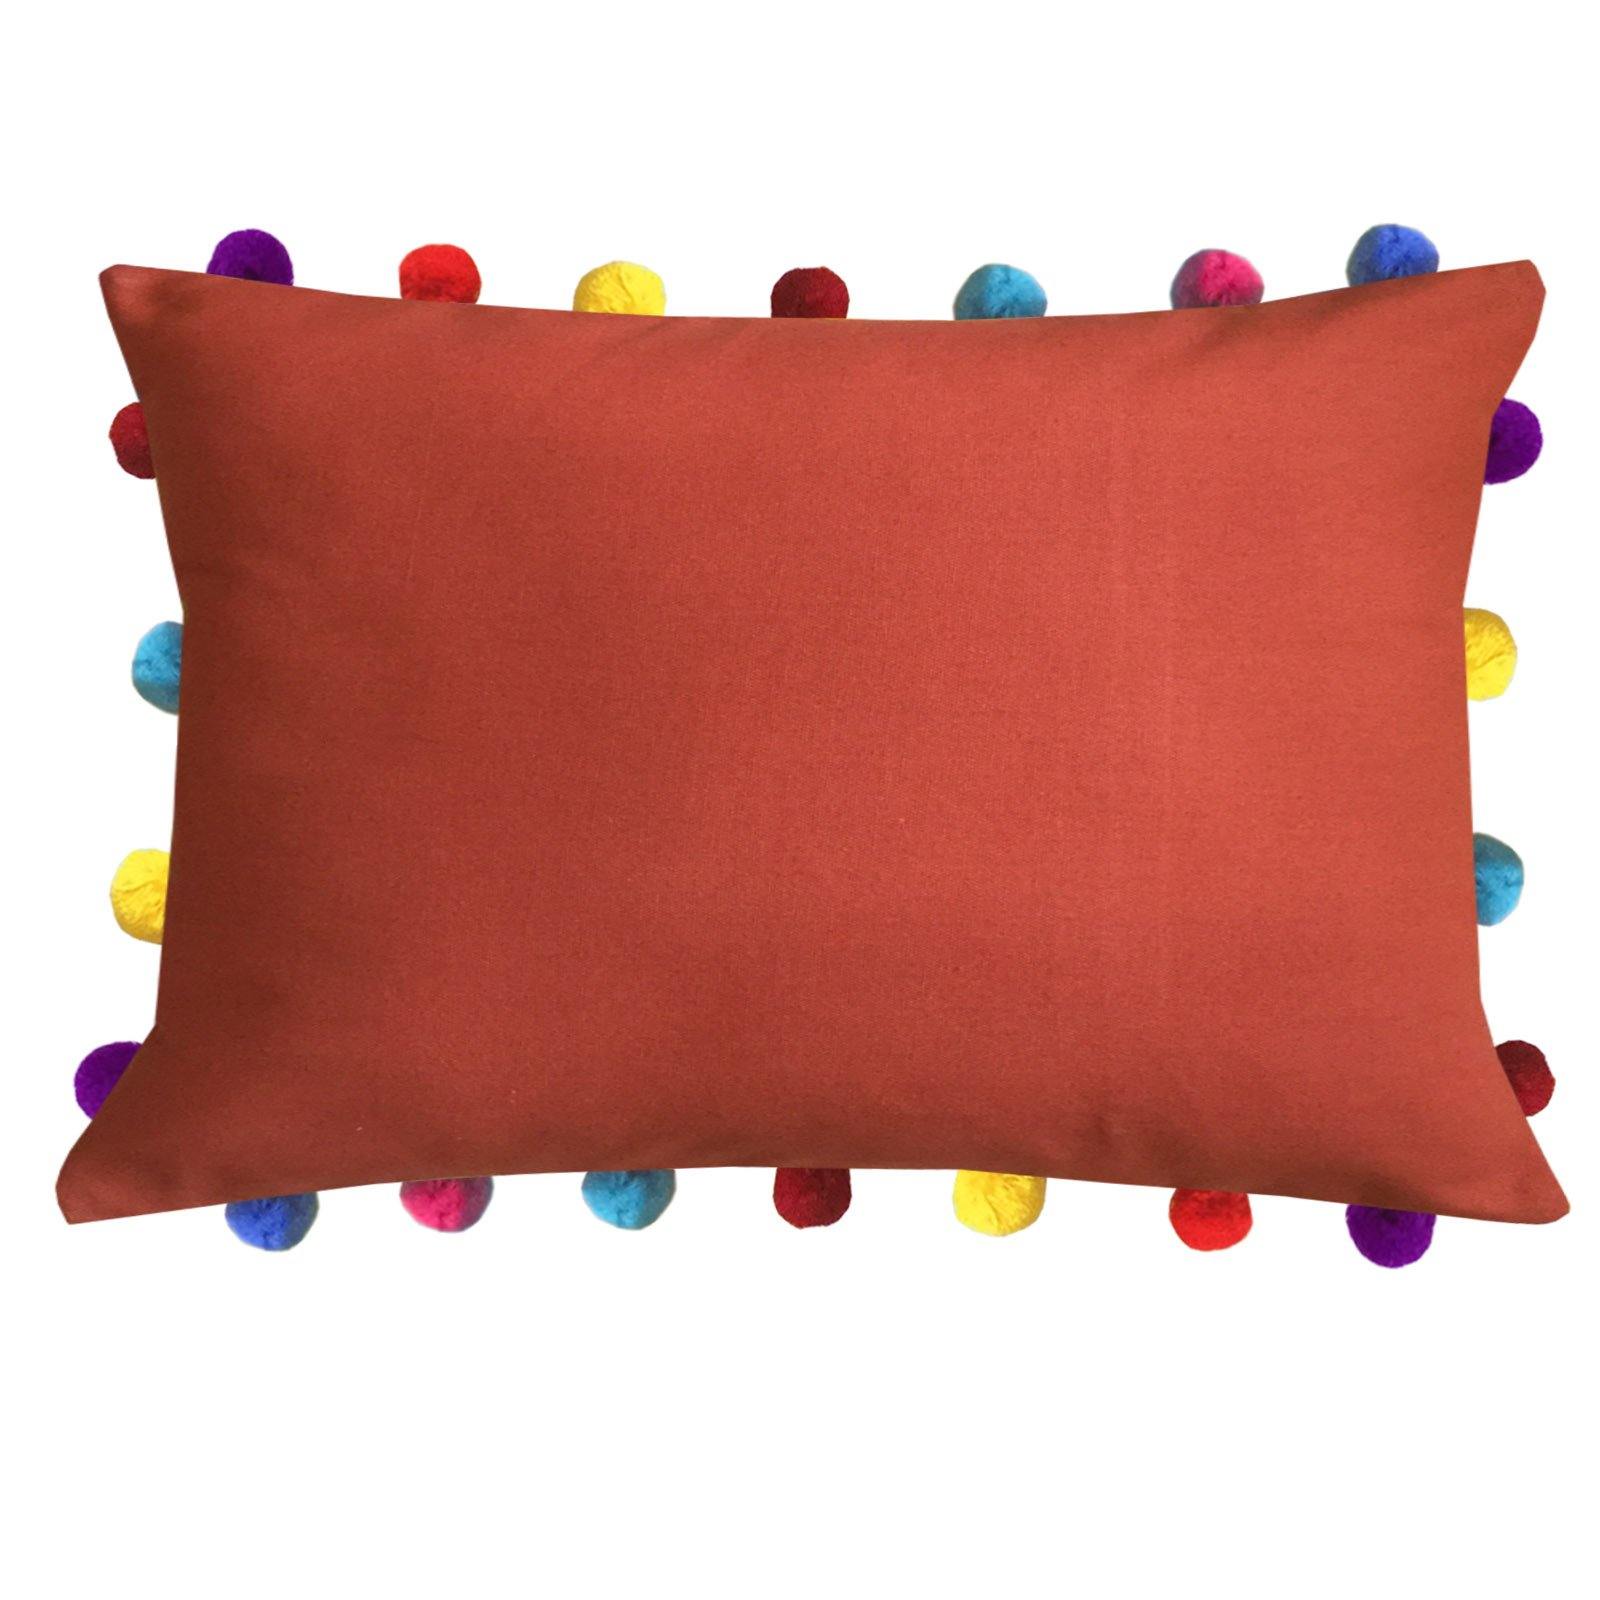 Lushomes Red Wood Cushion Cover with Colorful Pom poms (Single pc, 14 x 20”) - Lushomes